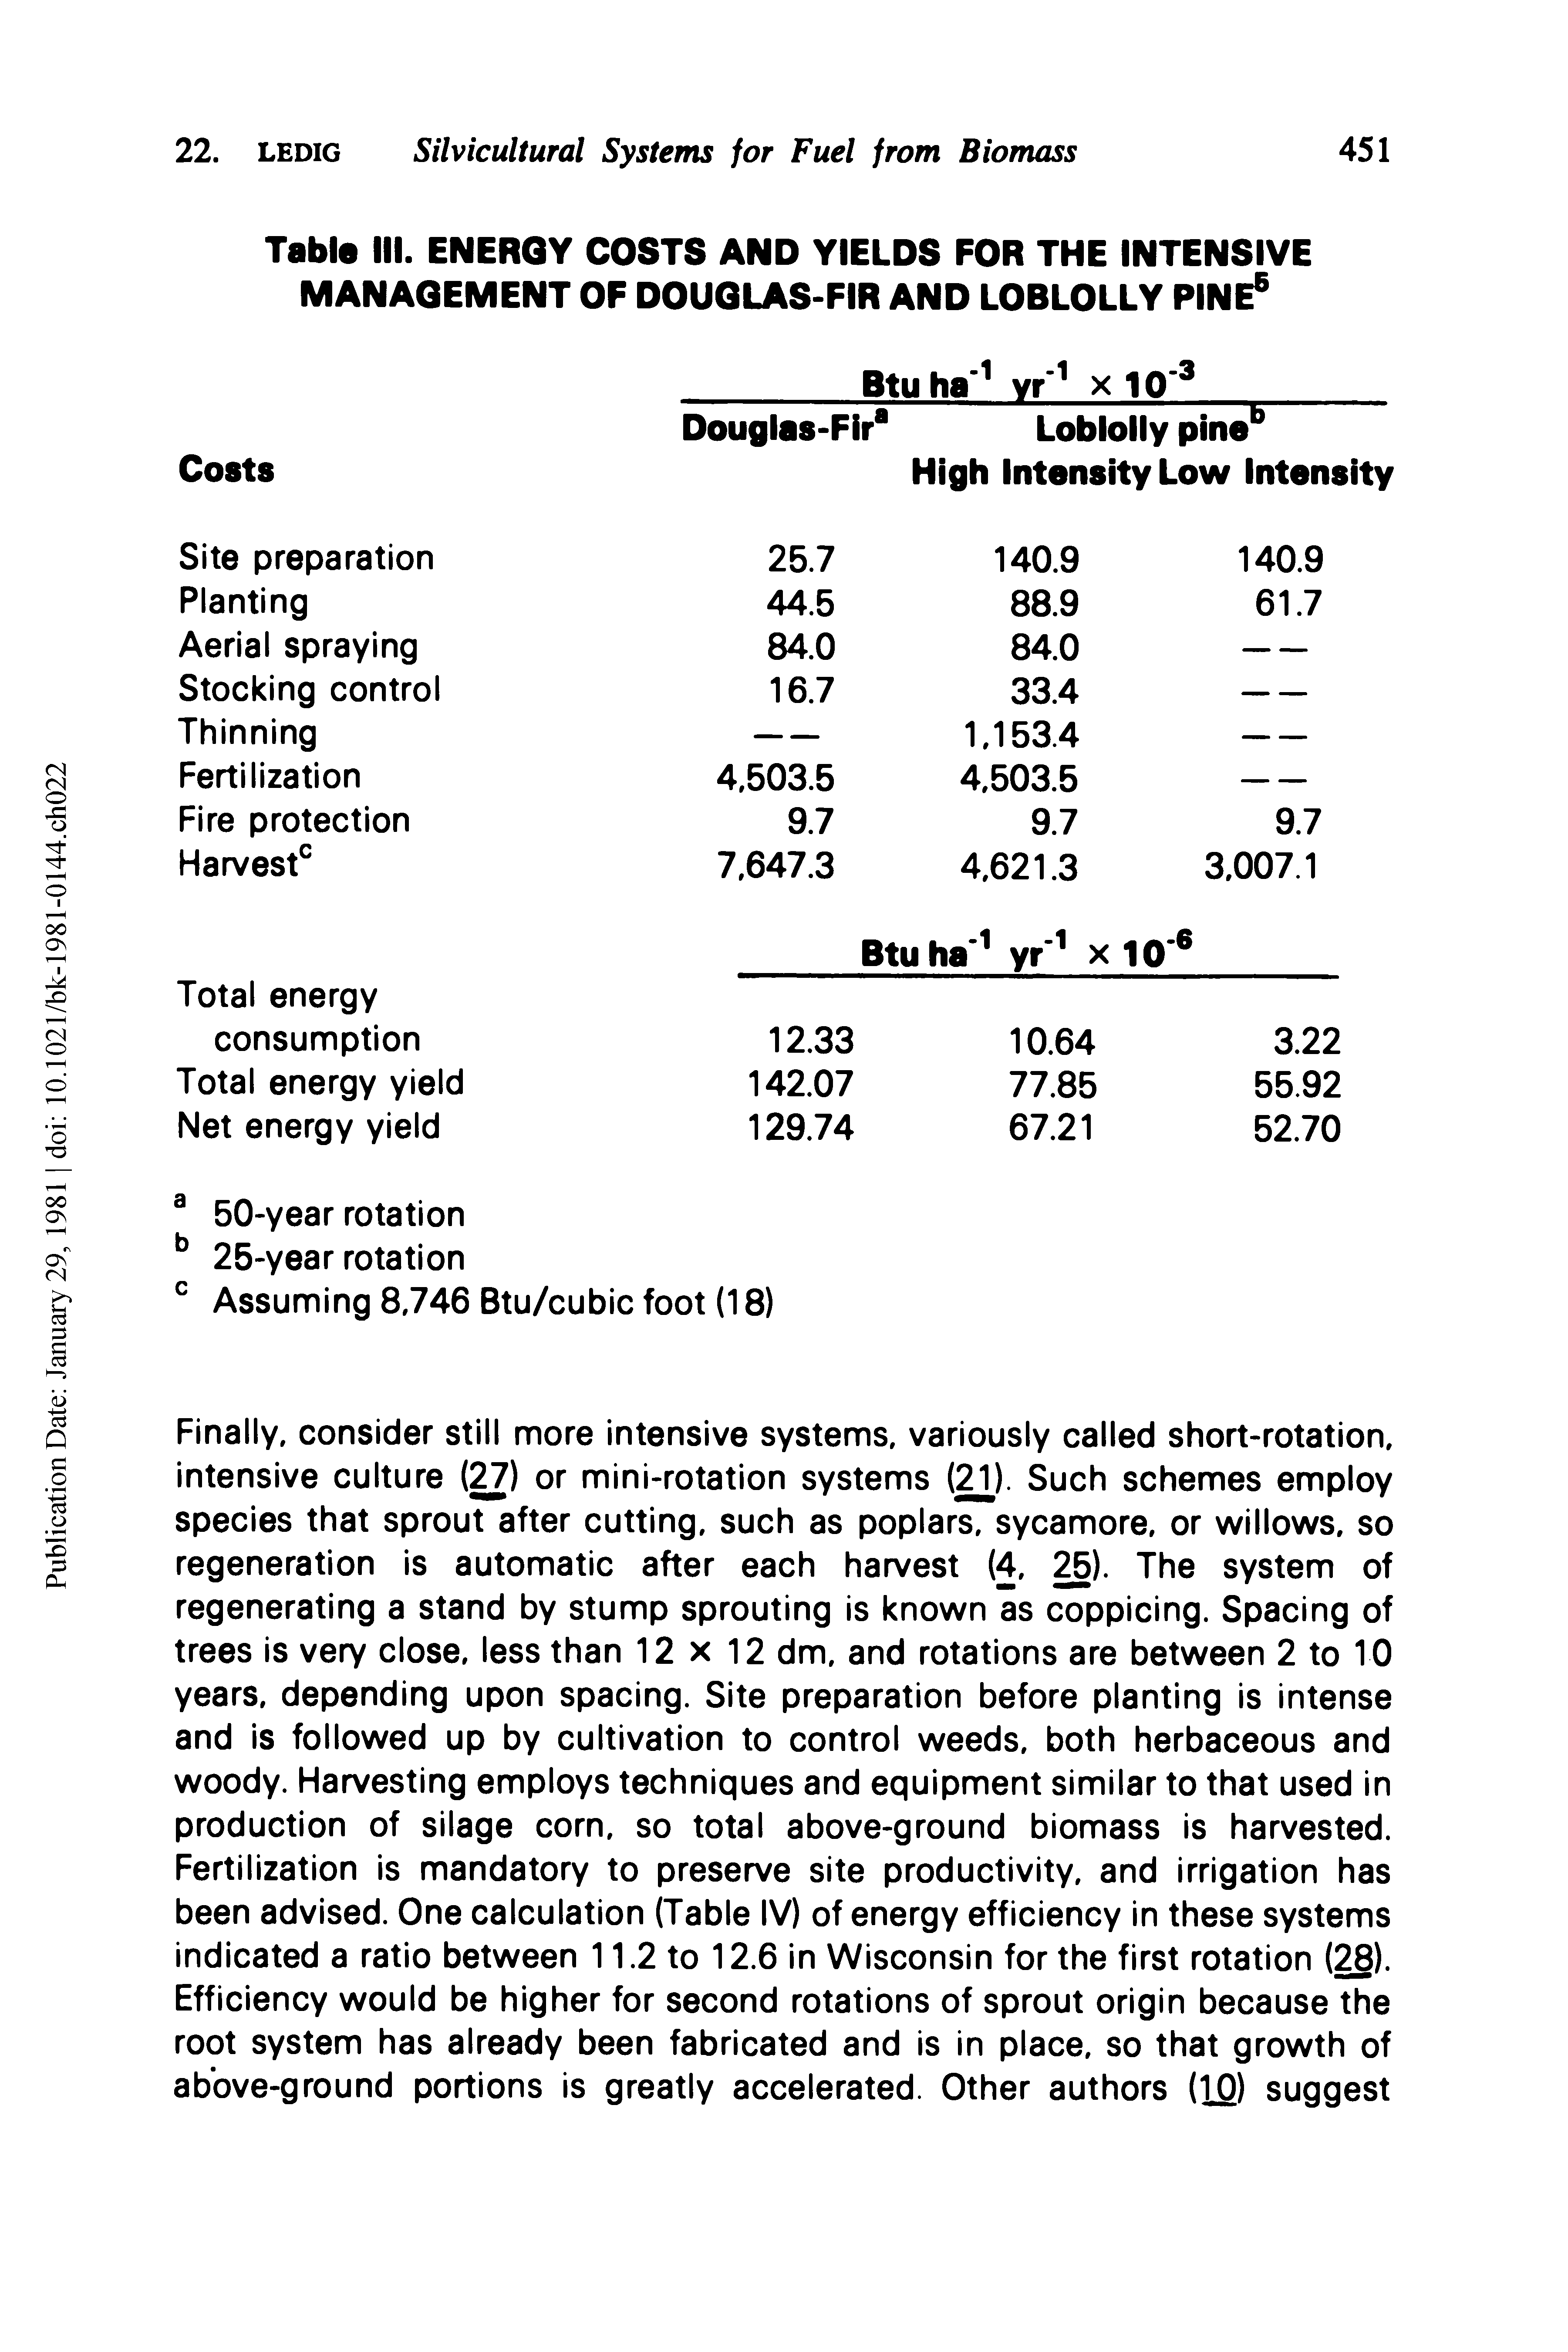 Table III. ENERGY COSTS AND YIELDS FOR THE INTENSIVE MANAGEMENT OF DOUGLAS-FIR AND LOBLOLLY PINE ...